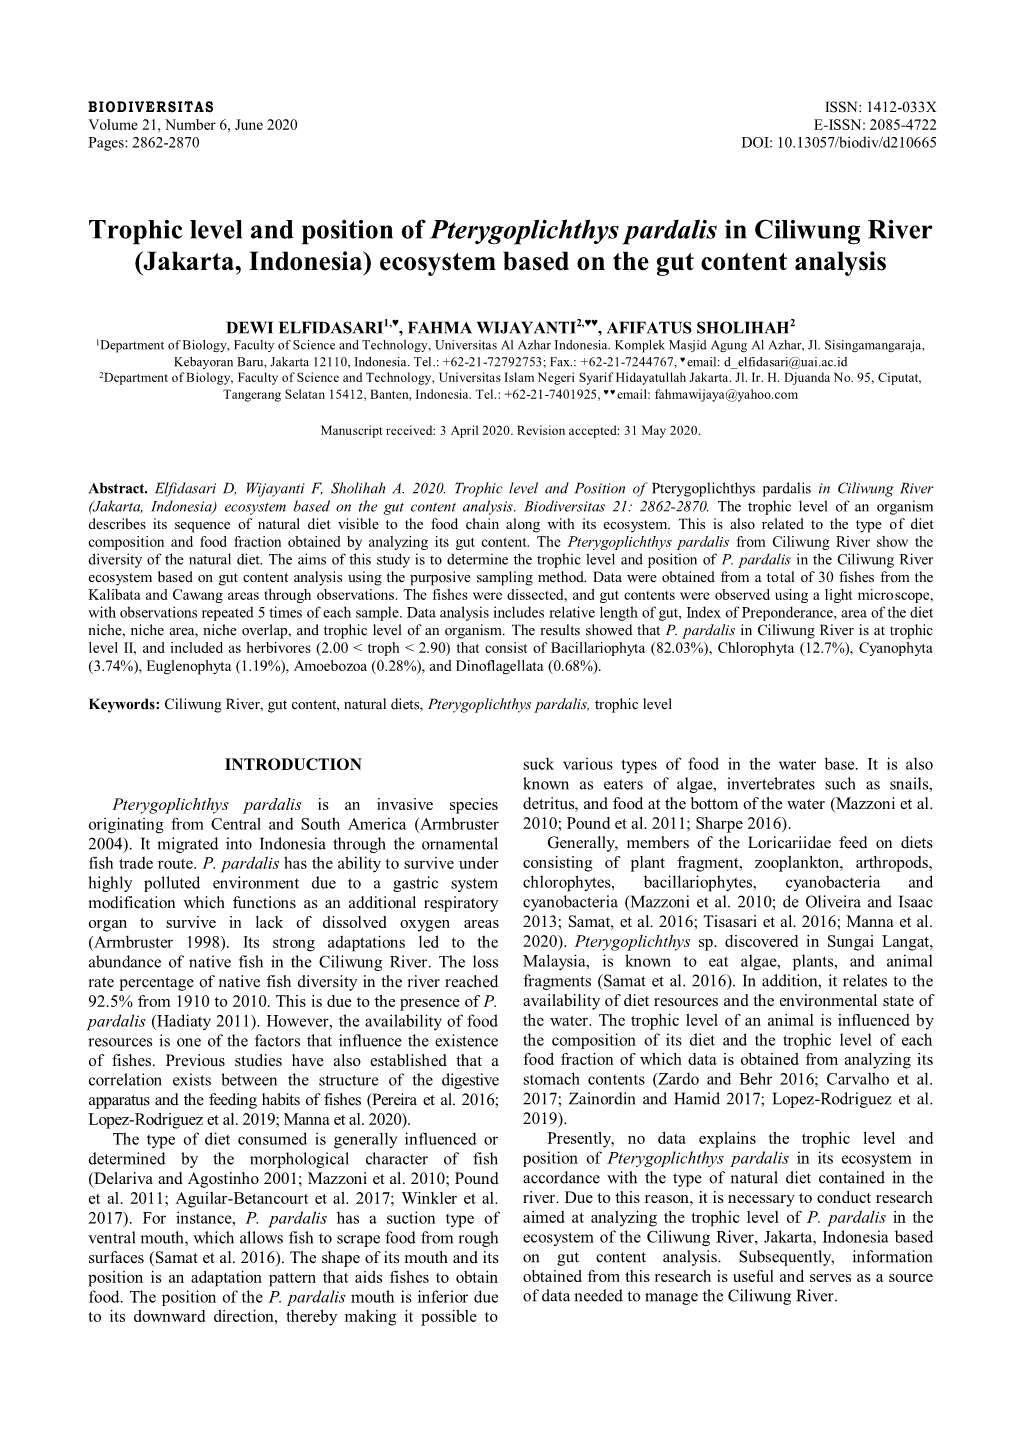 Trophic Level and Position of Pterygoplichthys Pardalis in Ciliwung River (Jakarta, Indonesia) Ecosystem Based on the Gut Content Analysis